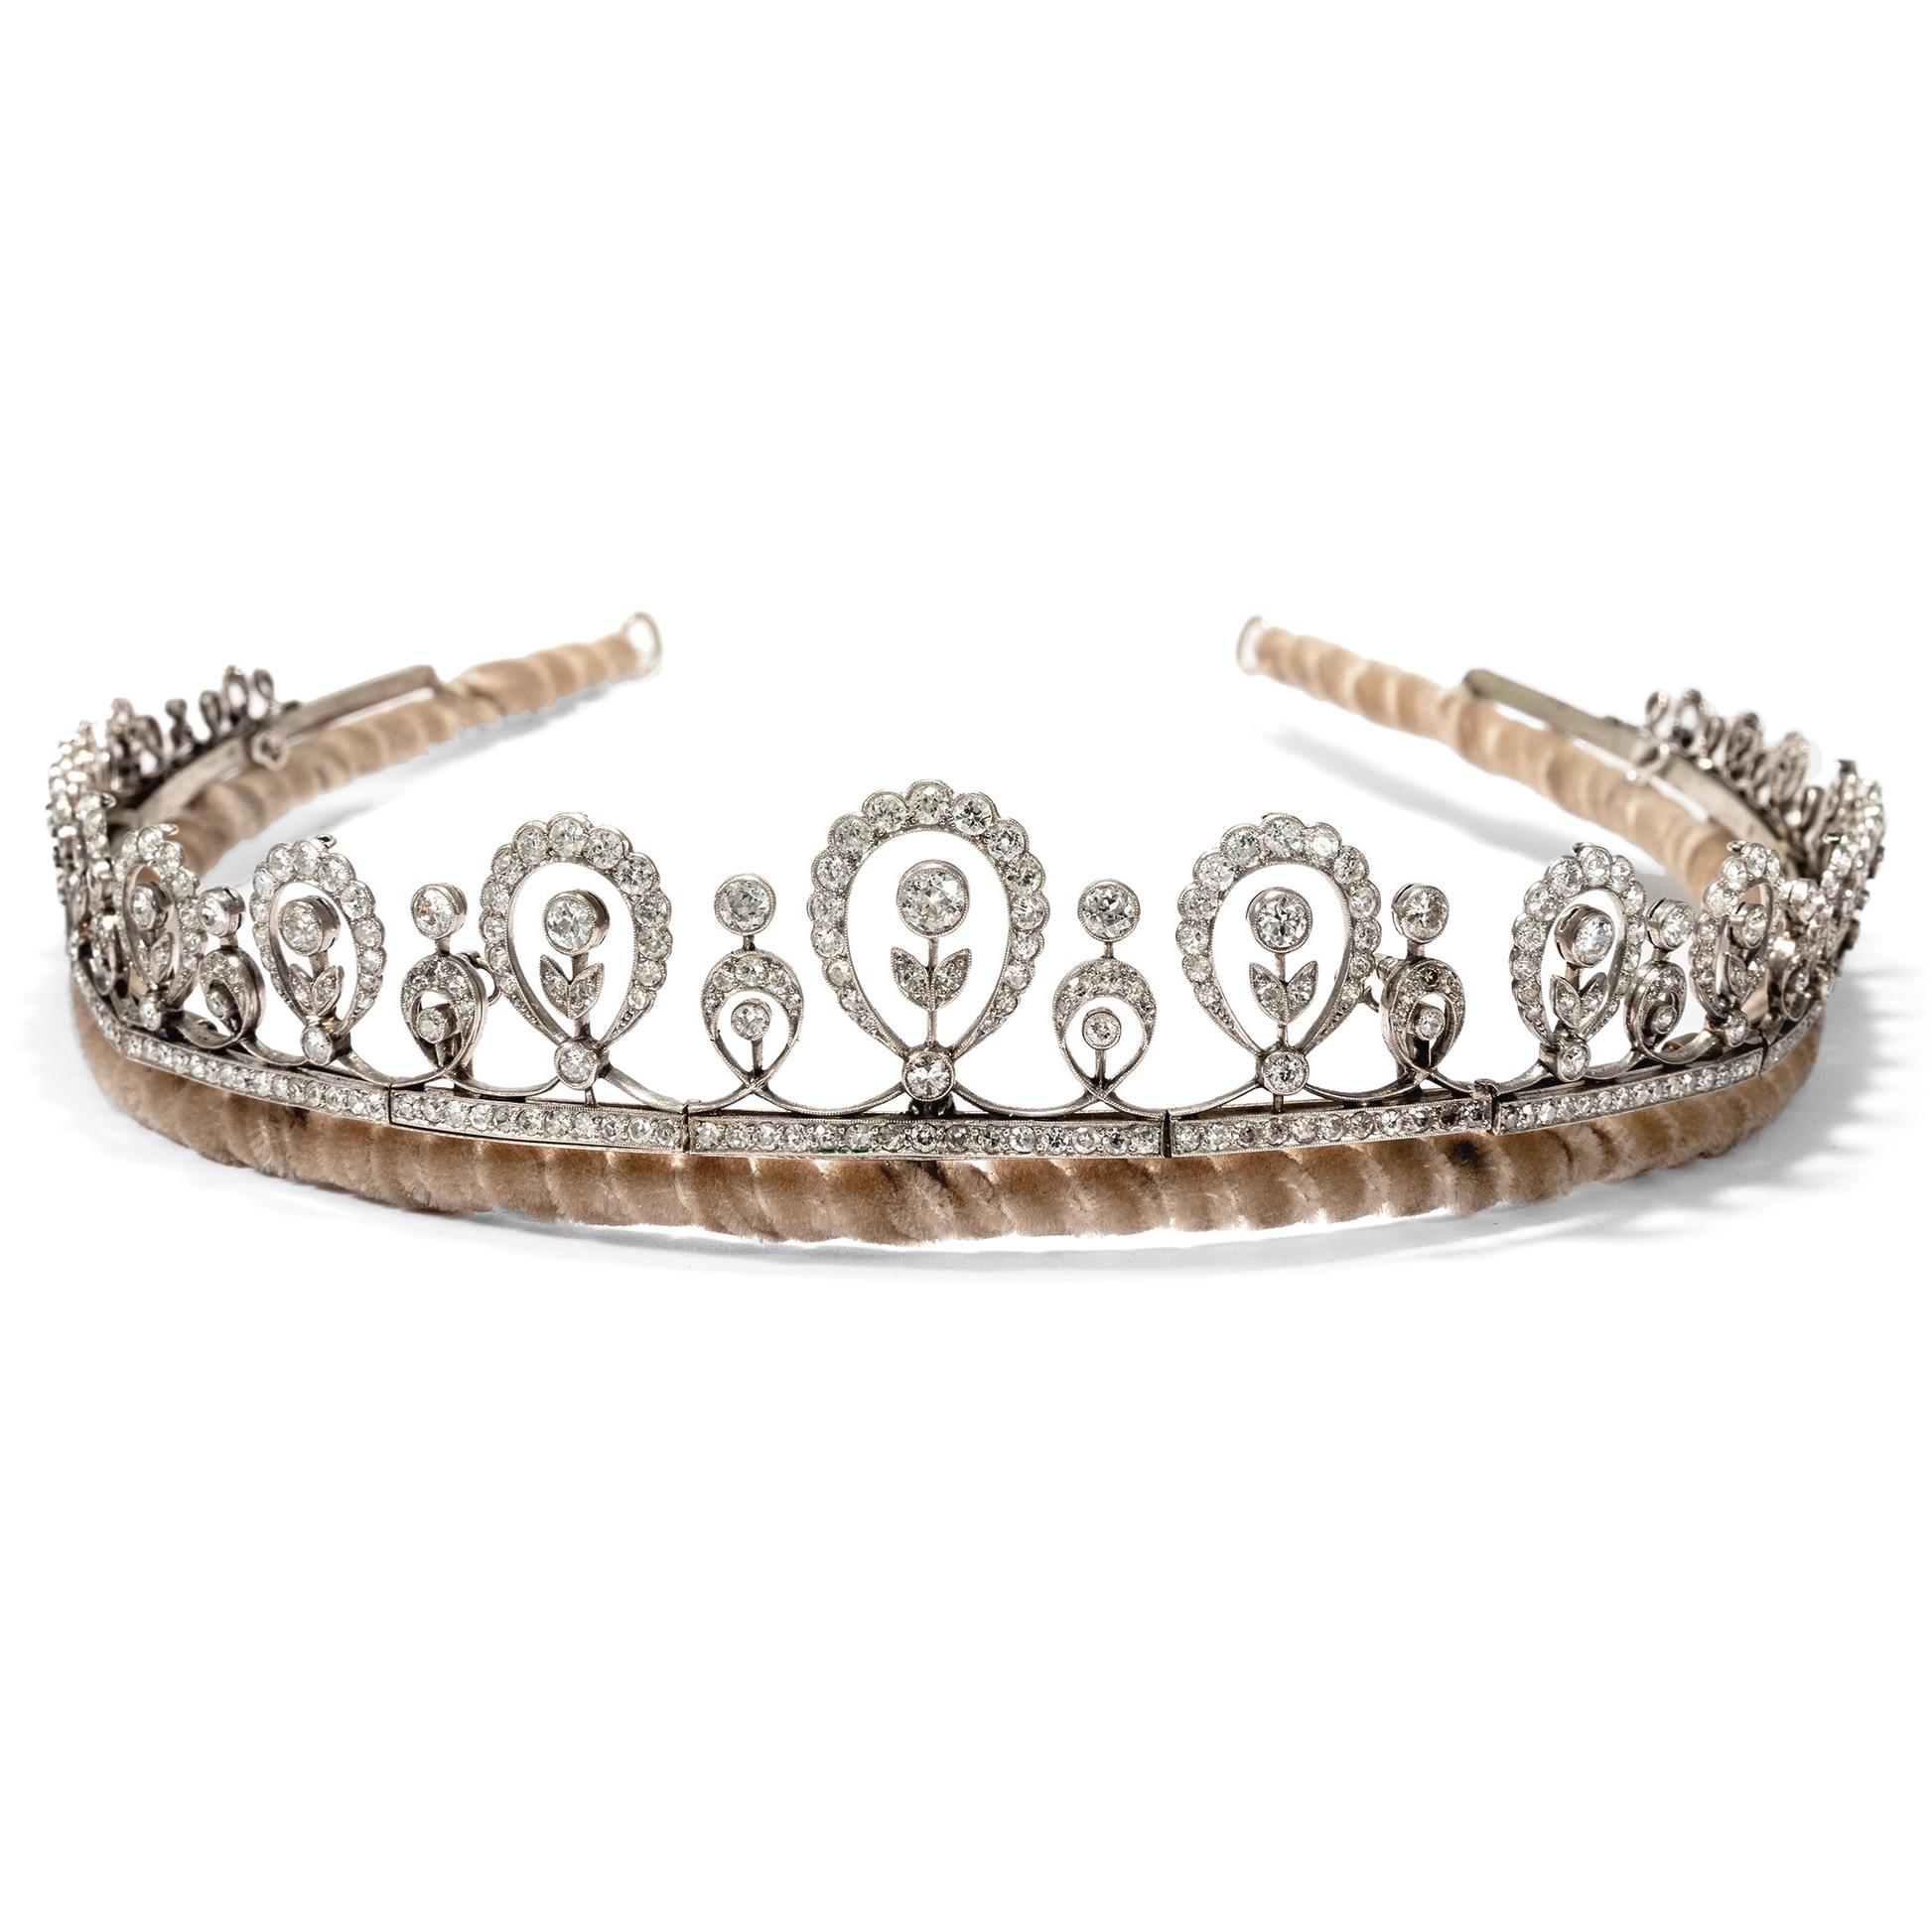 Few pieces encapsulate the glory of times past as perfectly as the tiara. Even though the tiara’s formal function as adornment and distinction of the noble class has grown obsolete by now, we may still wear and admire such pieces for their beauty